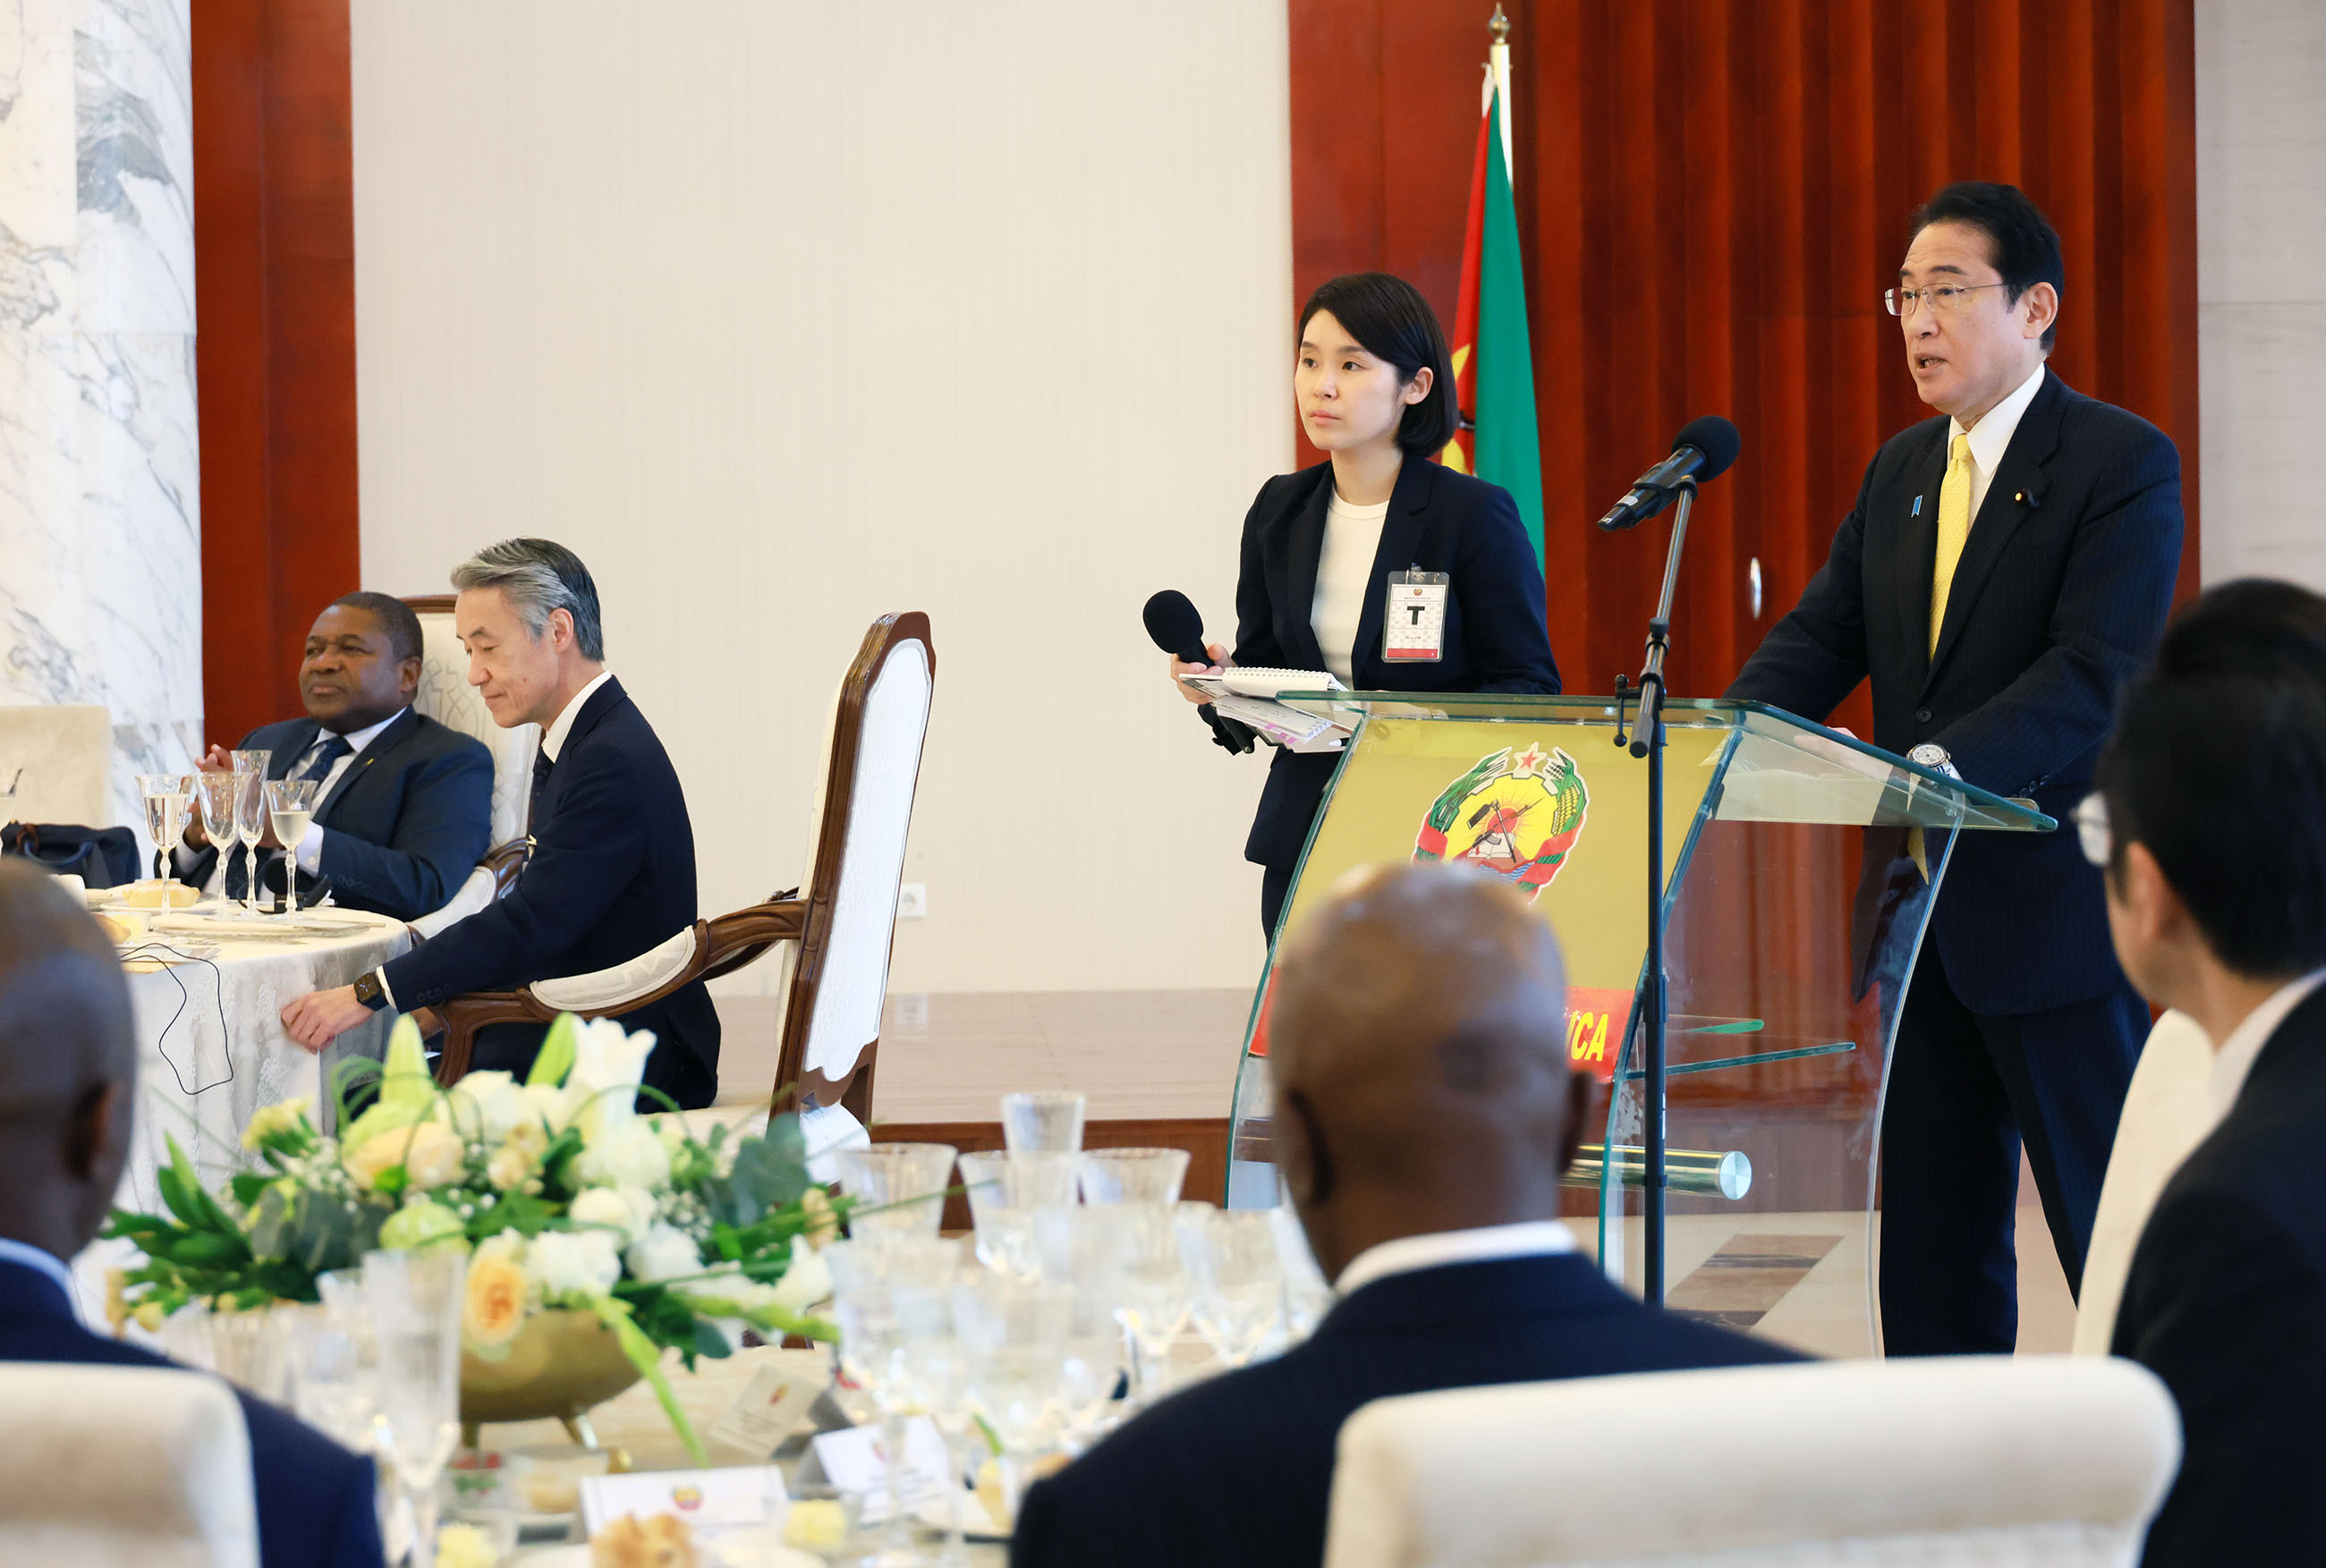 Prime Minister Kishida delivering an address at the working lunch (1)